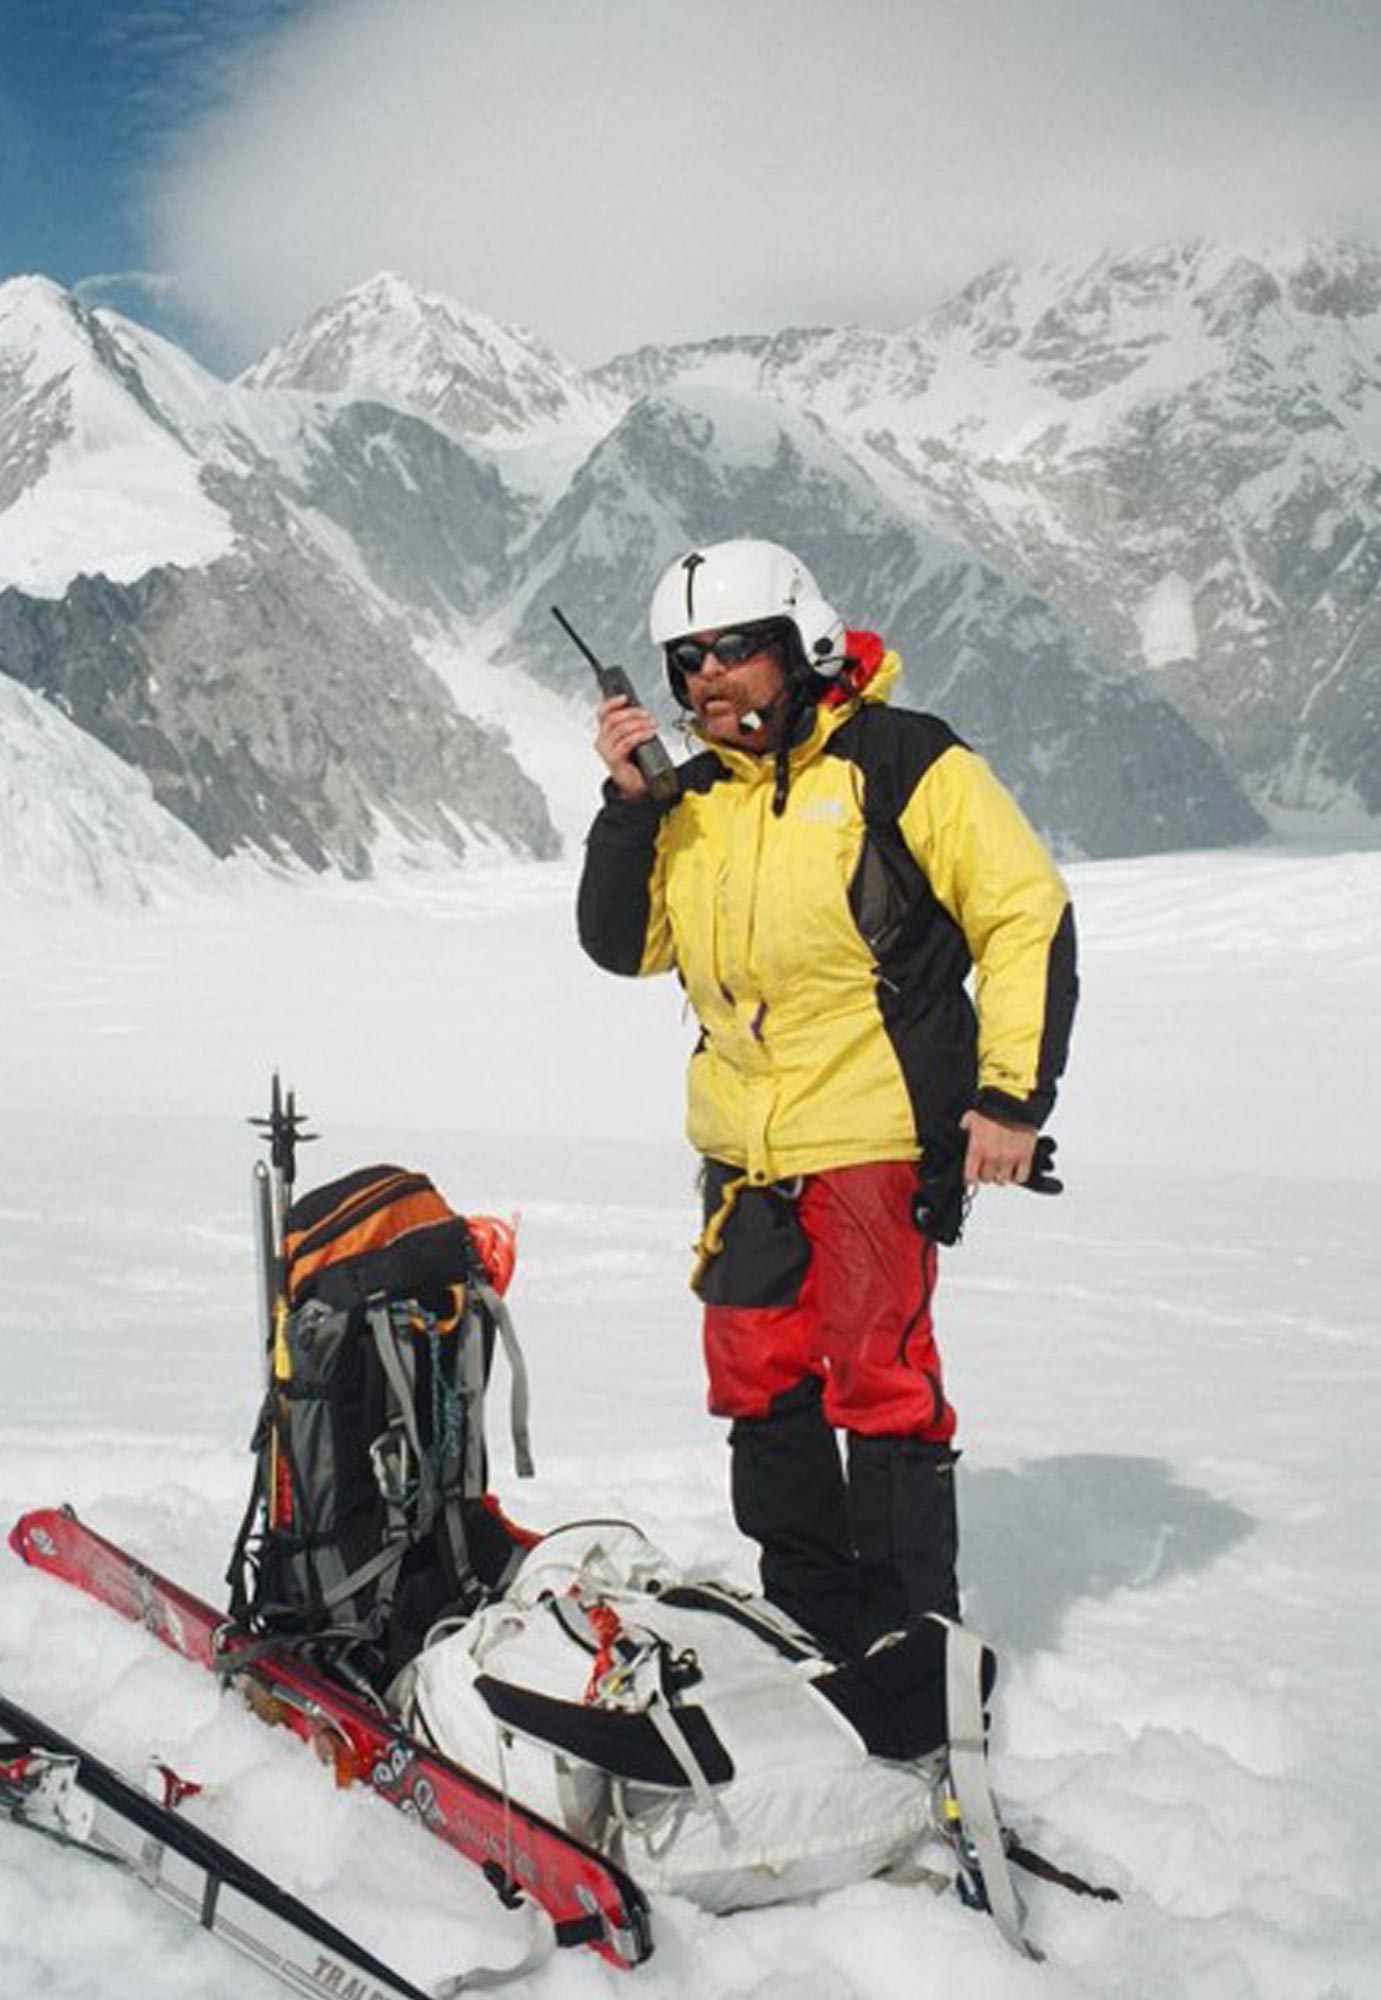 a man wears ski gear and speaks into a walkie-talkie while standing on a snow cover mountain plateau